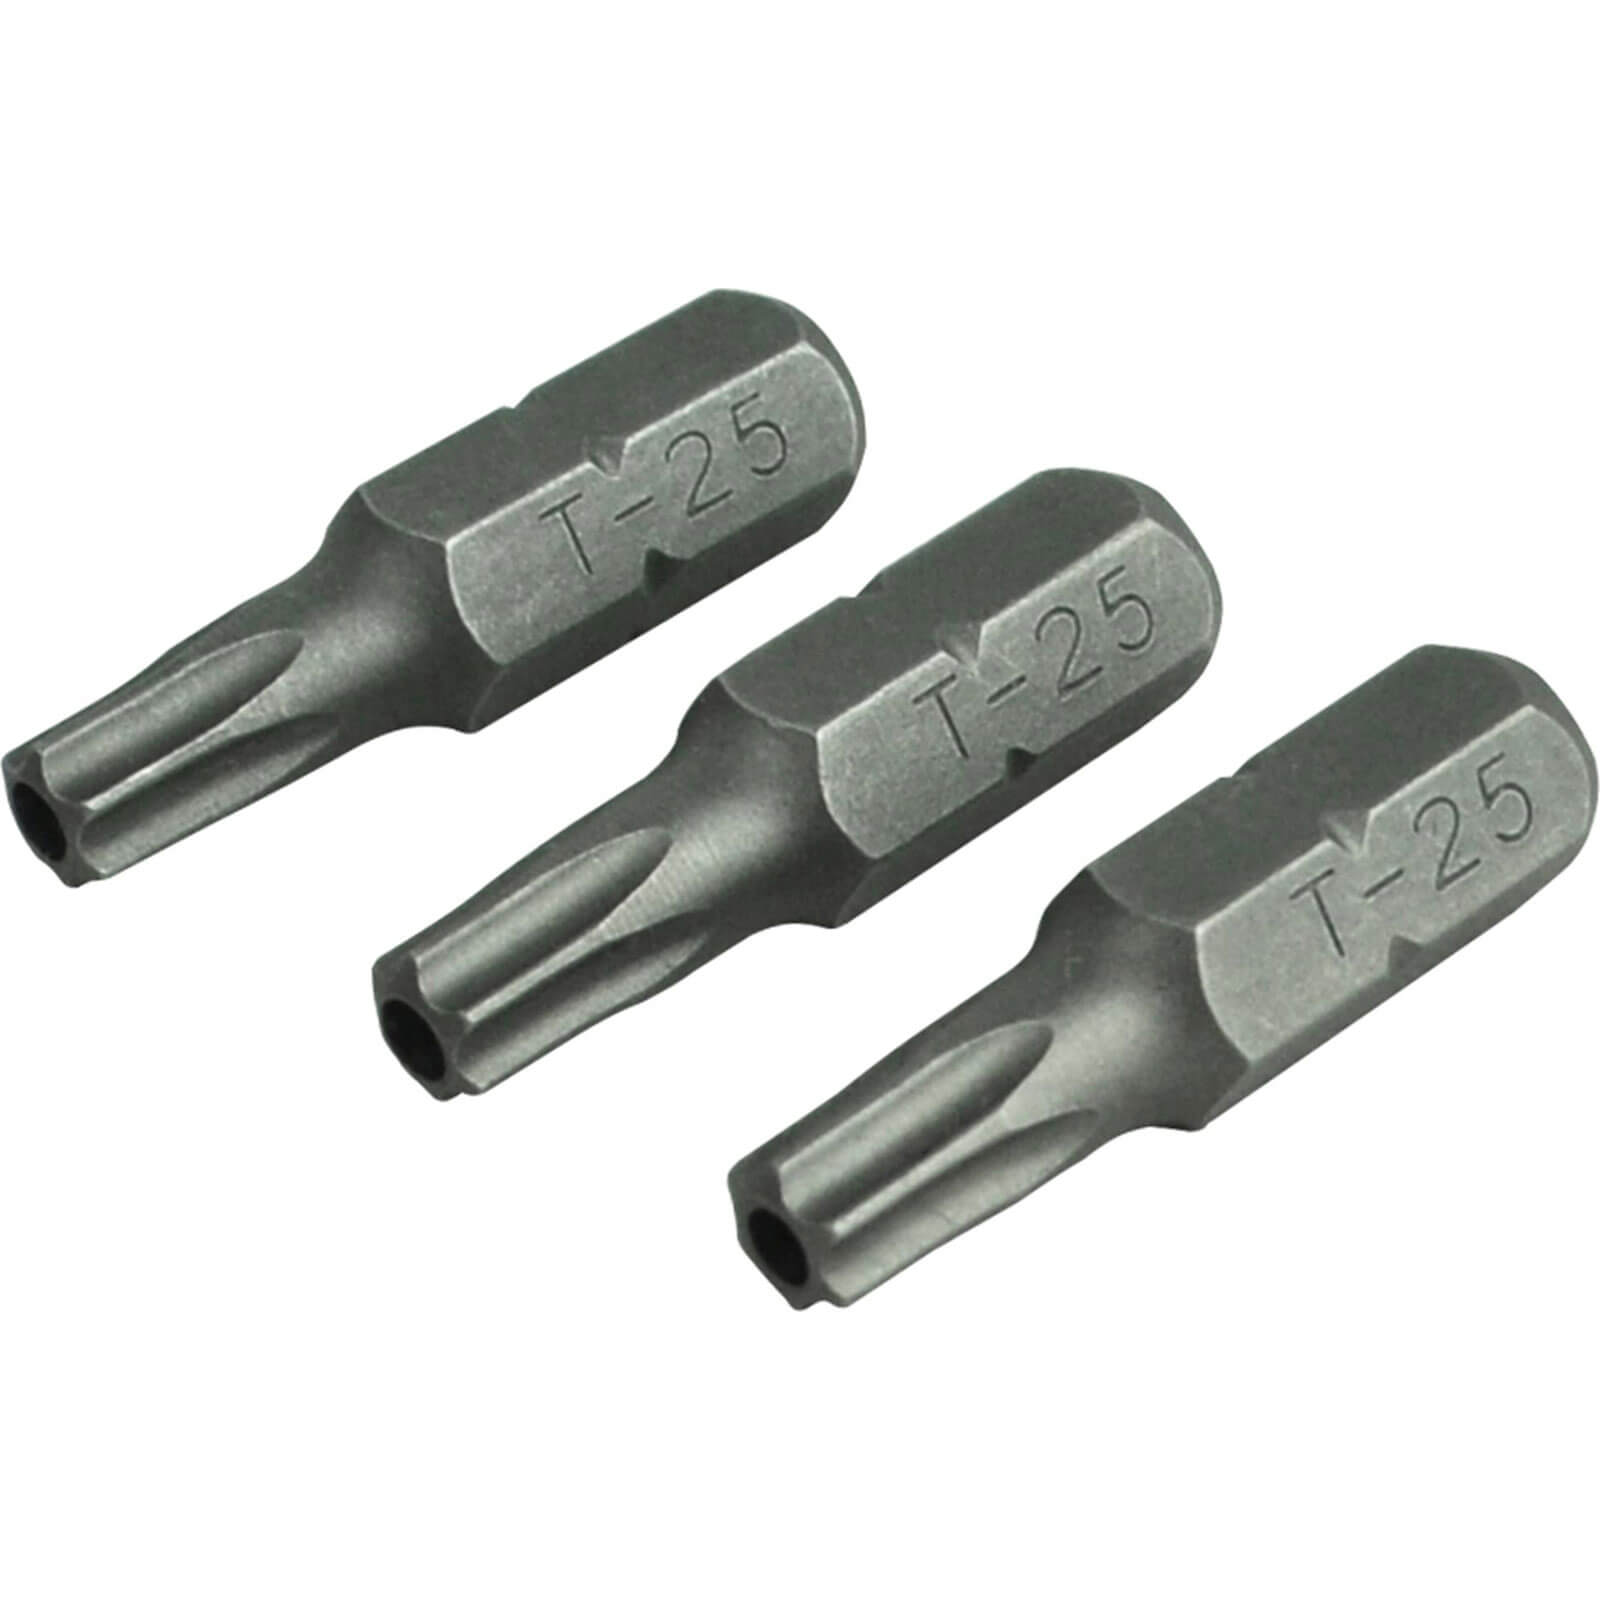 Image of Faithfull S2 Security Torx Screwdriver Bits T25 25mm Pack of 3